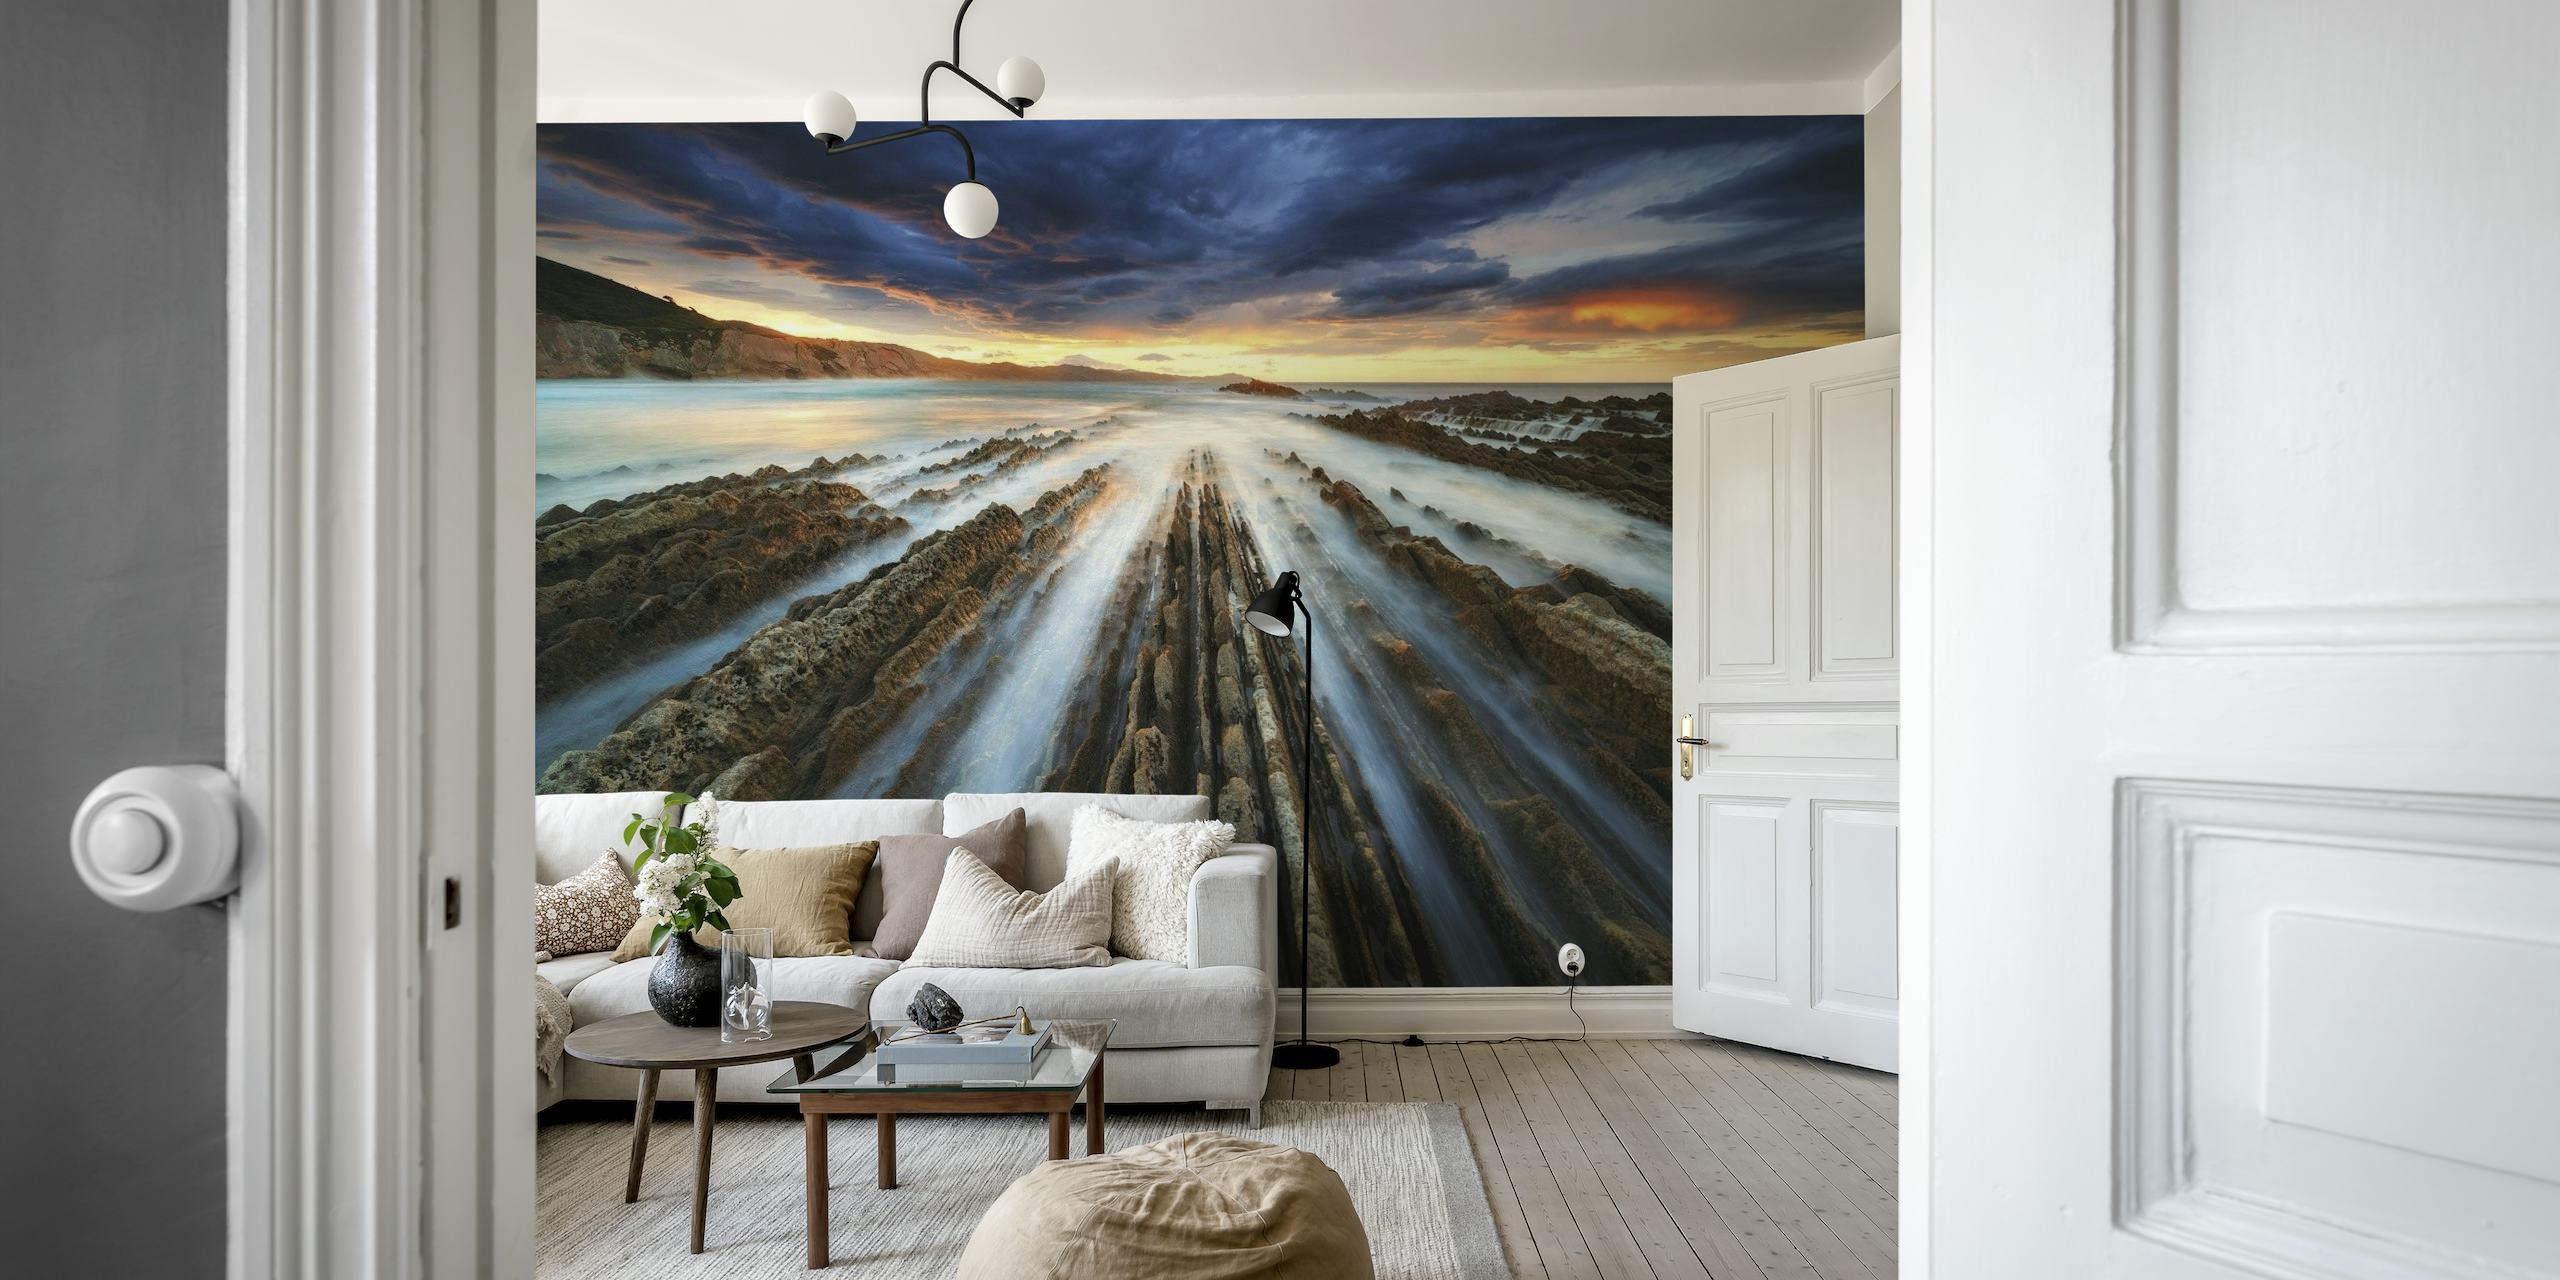 Zumaia Flysch wall mural depicting layered rock formations and ocean sunset